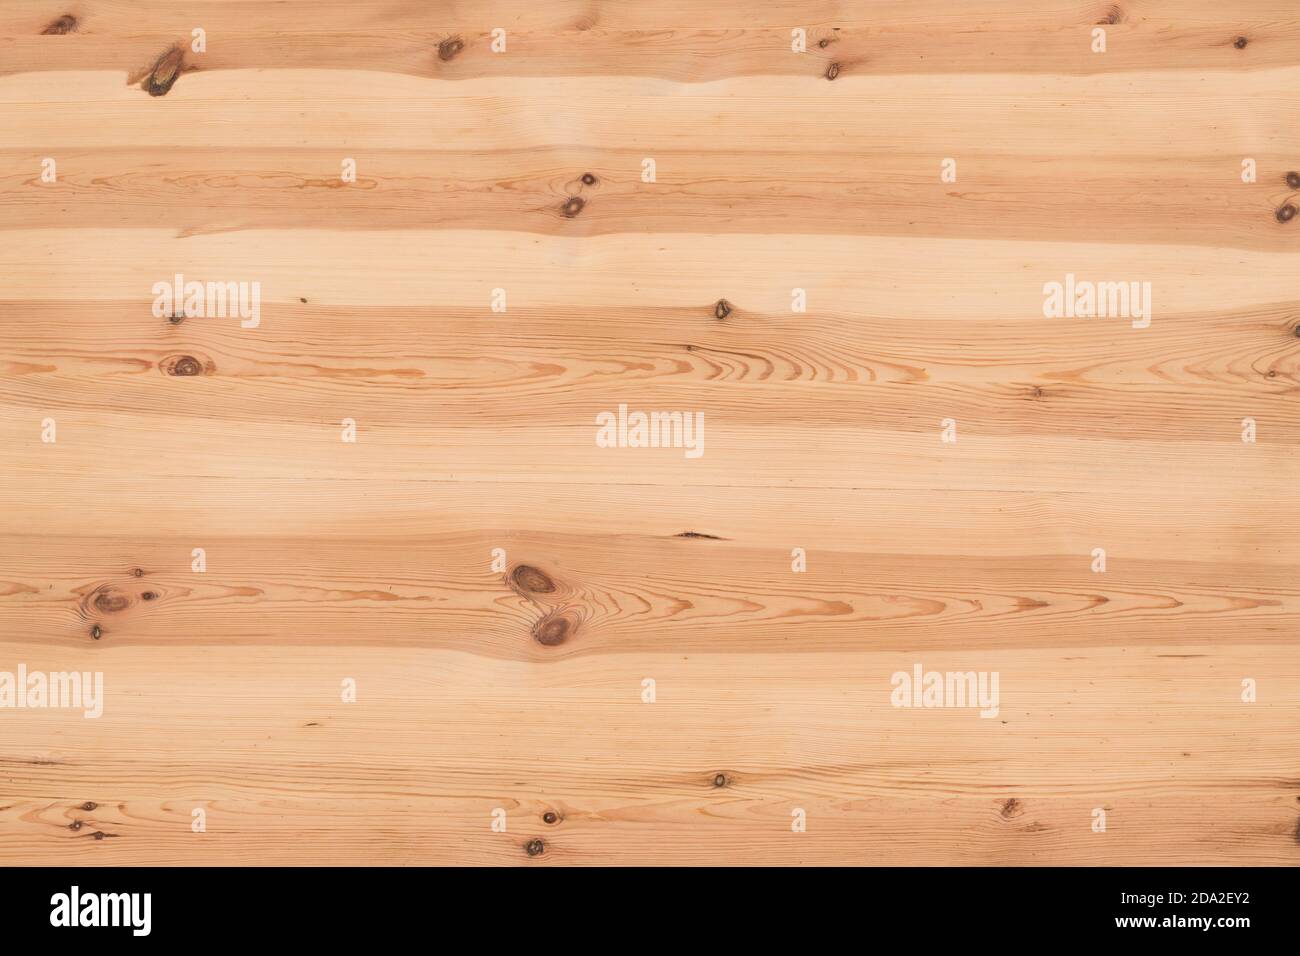 natural pine wood texture or wooden background Stock Photo